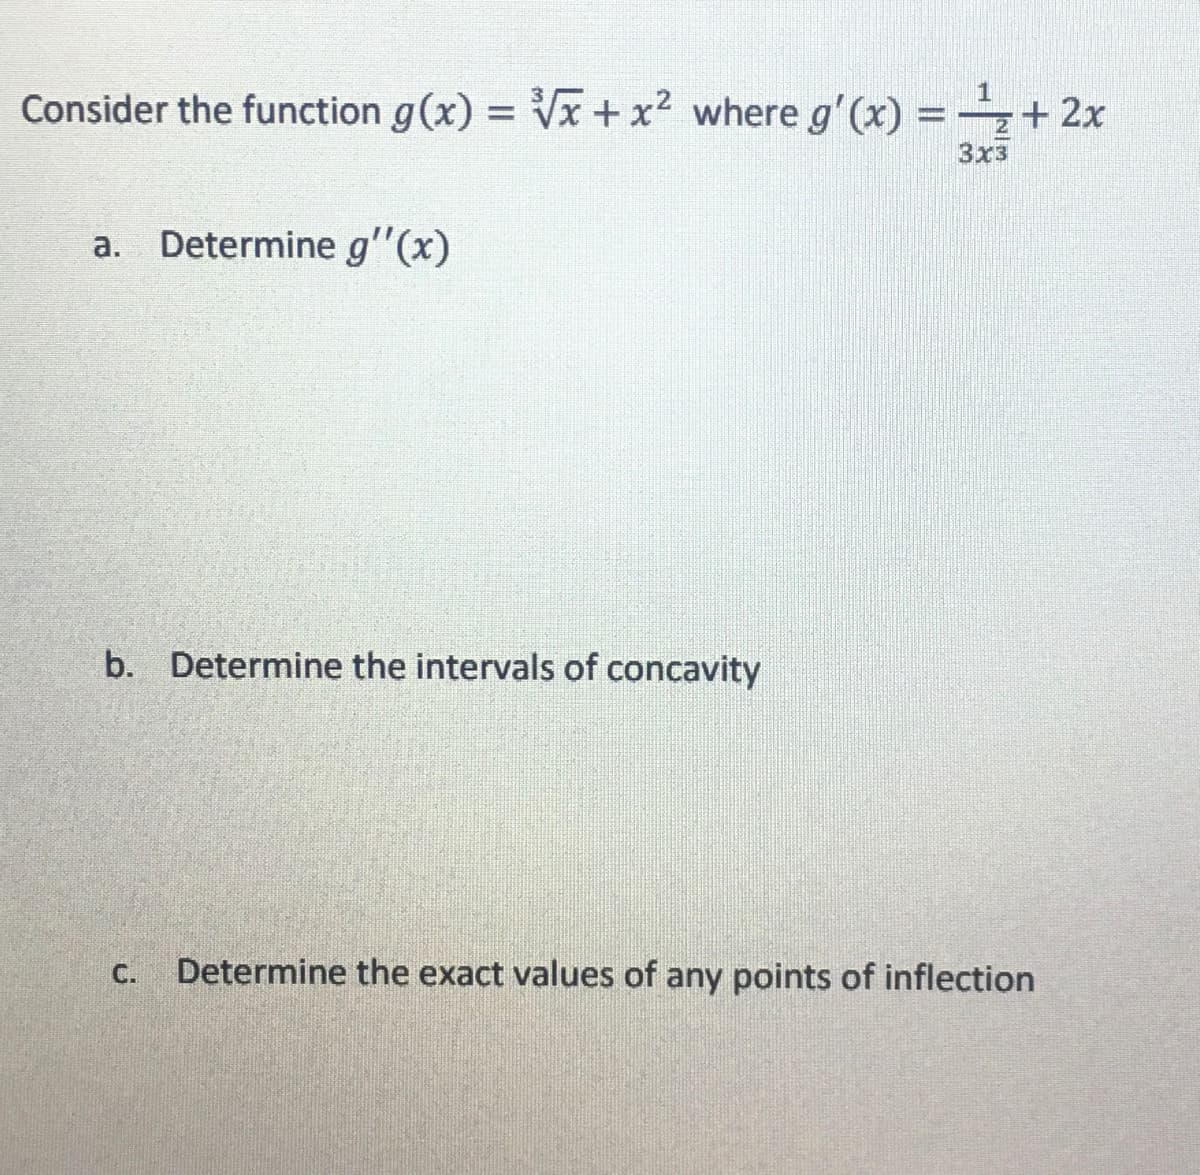 Consider the function g(x)=√x + x² where g'(x) = -¹₂ + 2x
1
3x3
a. Determine g'(x)
b. Determine the intervals of concavity
Determine the exact values of any points of inflection